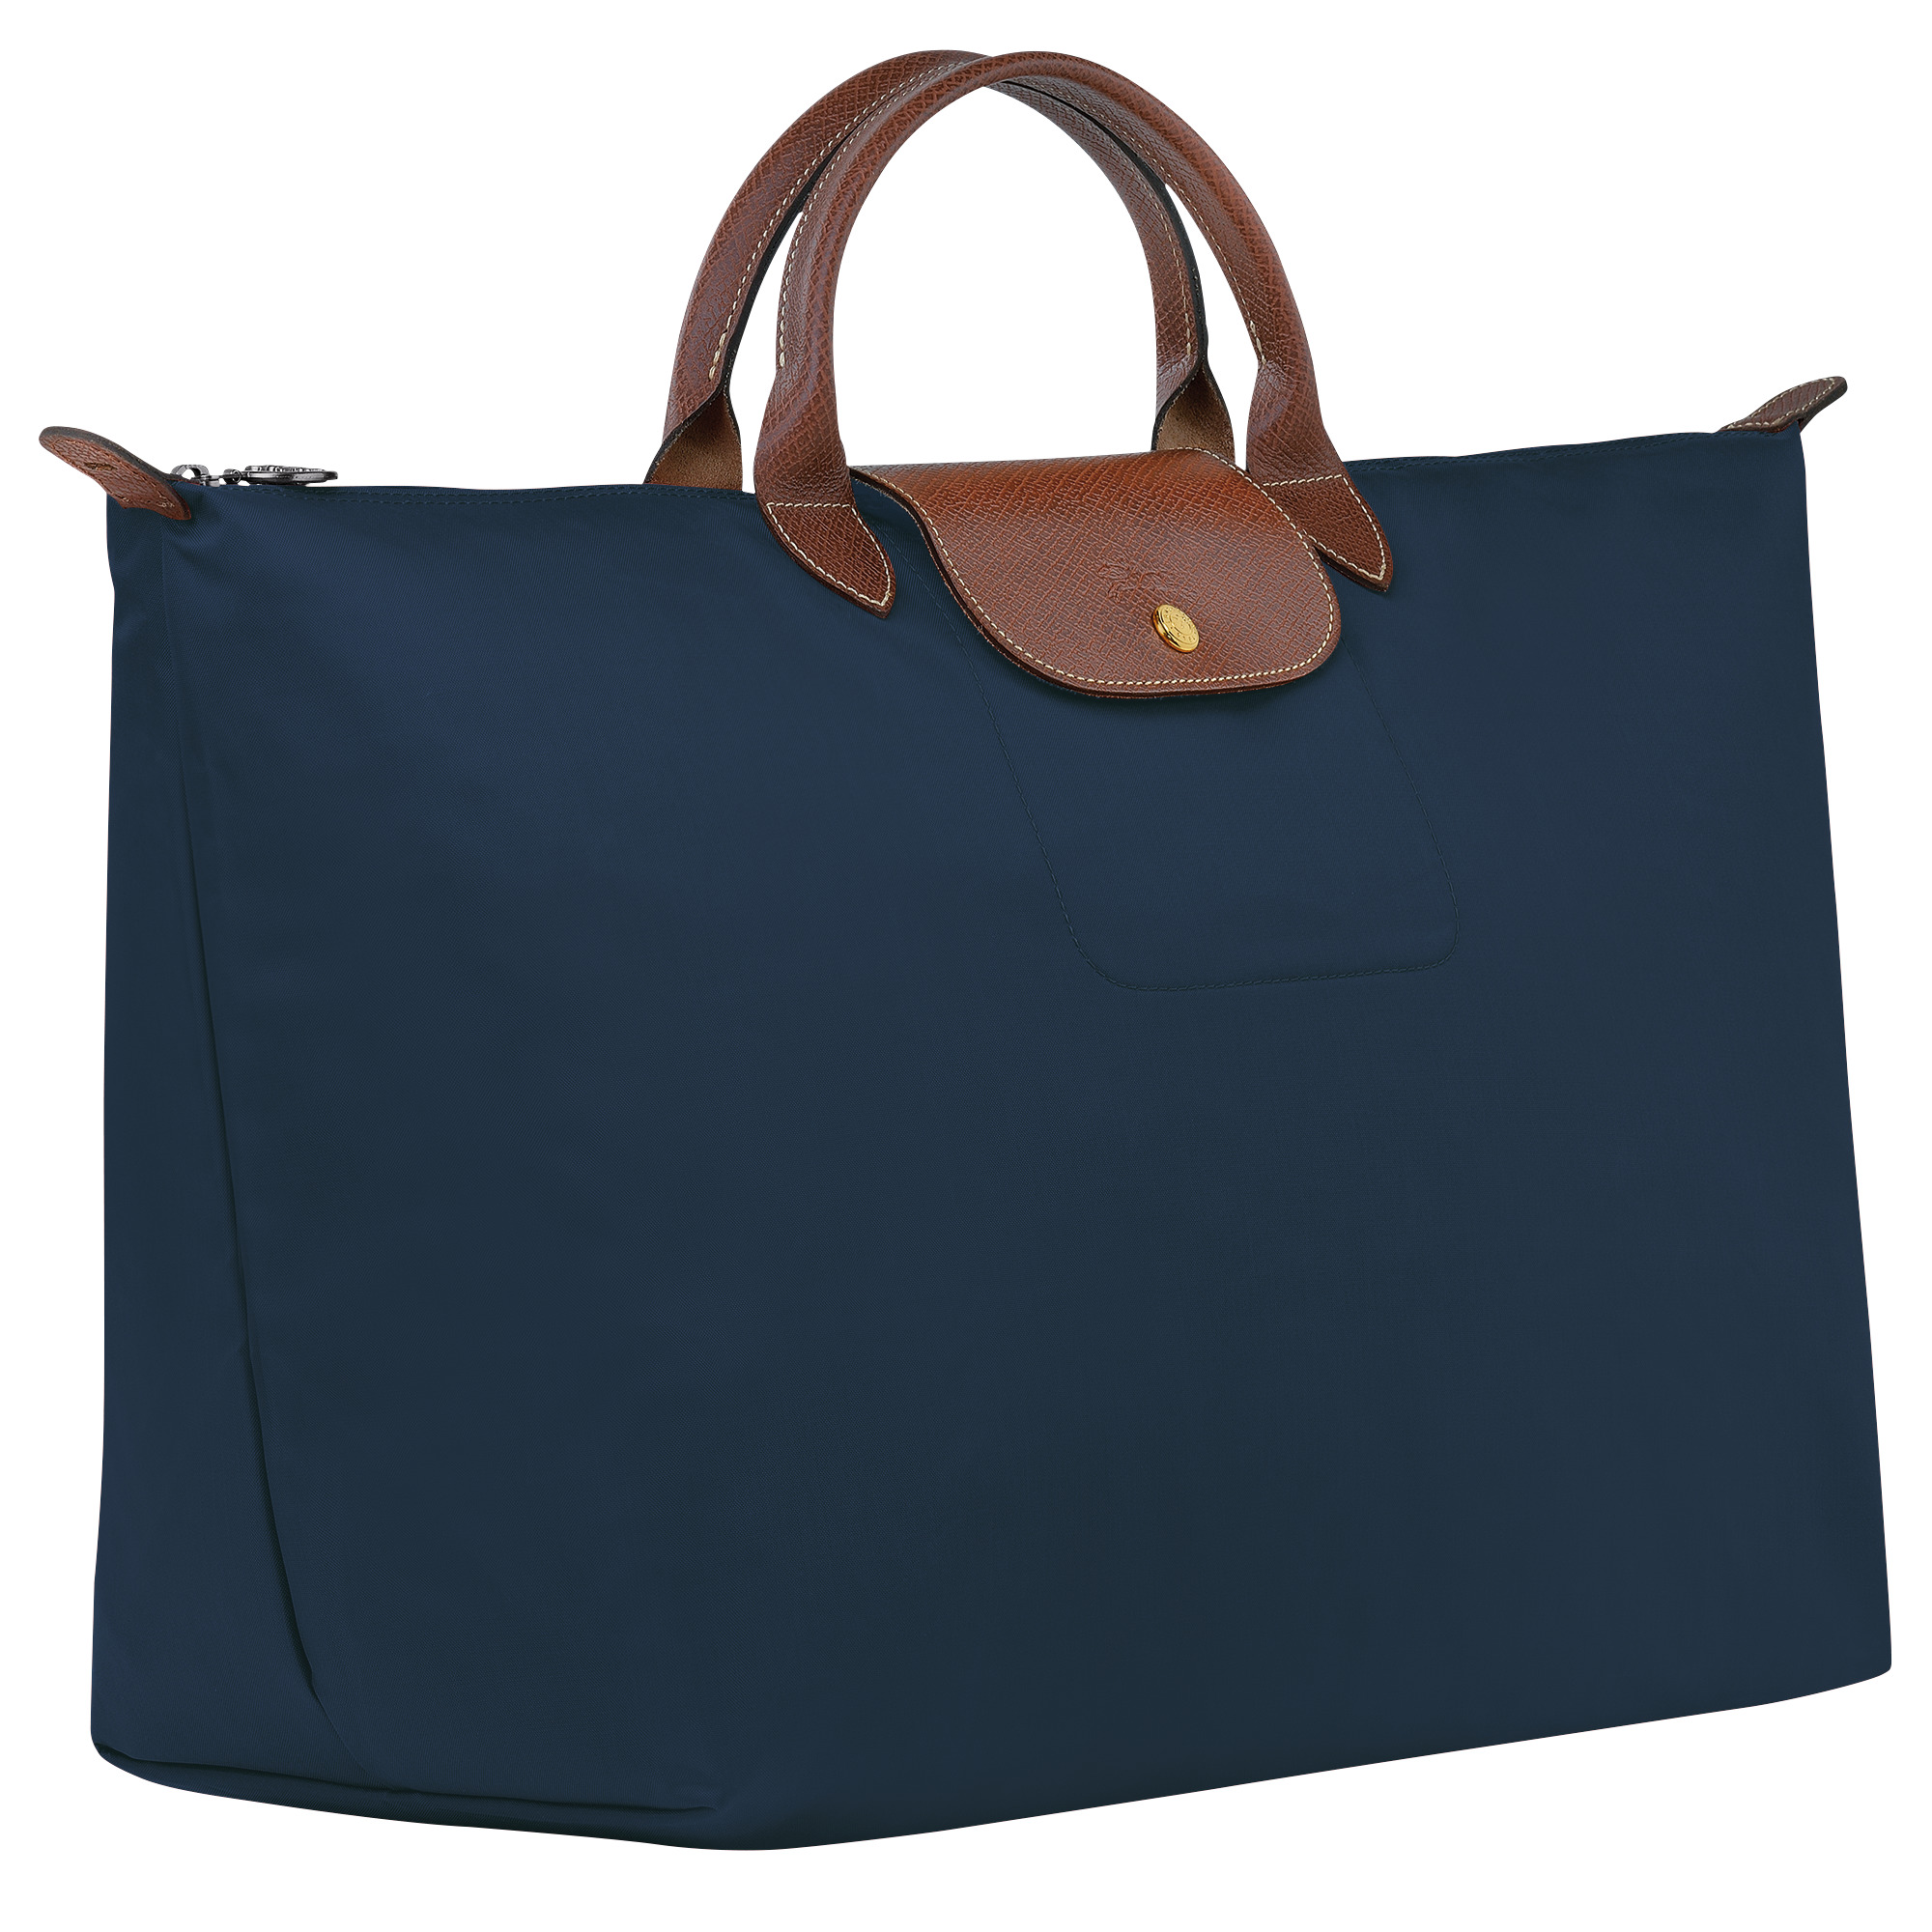 Le Pliage Original S Travel bag Navy - Recycled canvas - 3